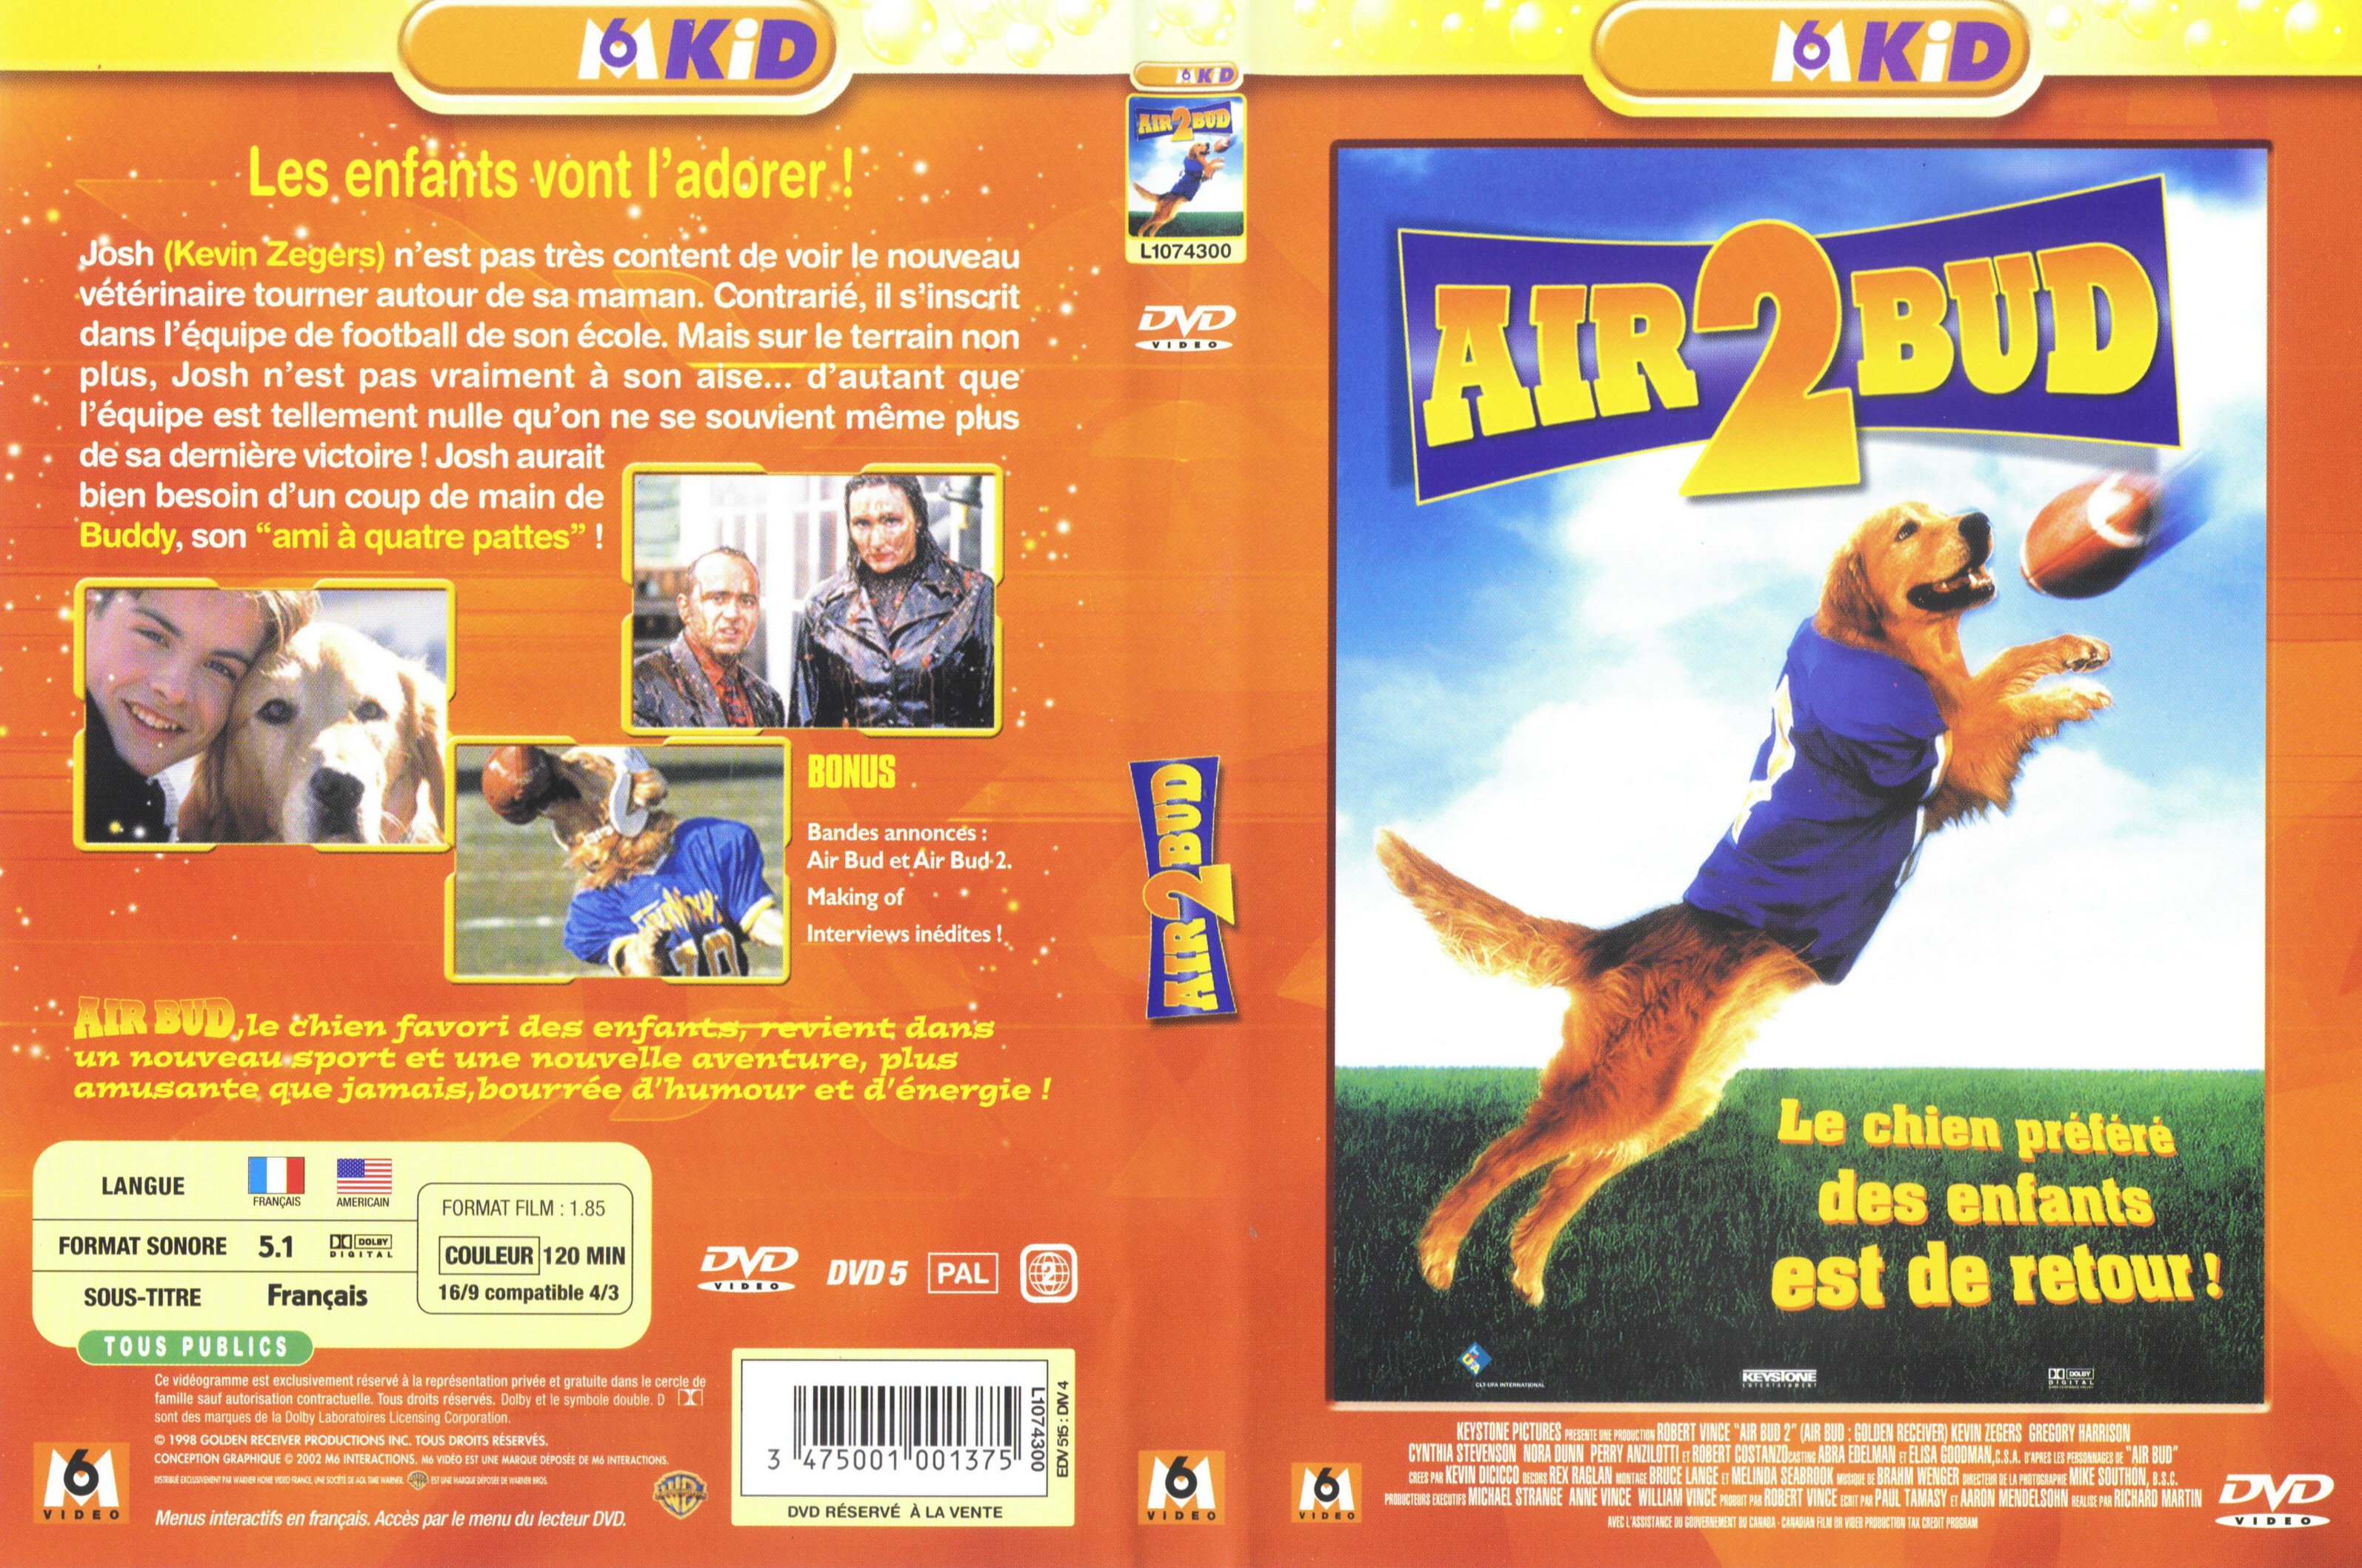 Jaquette DVD Air bud 2